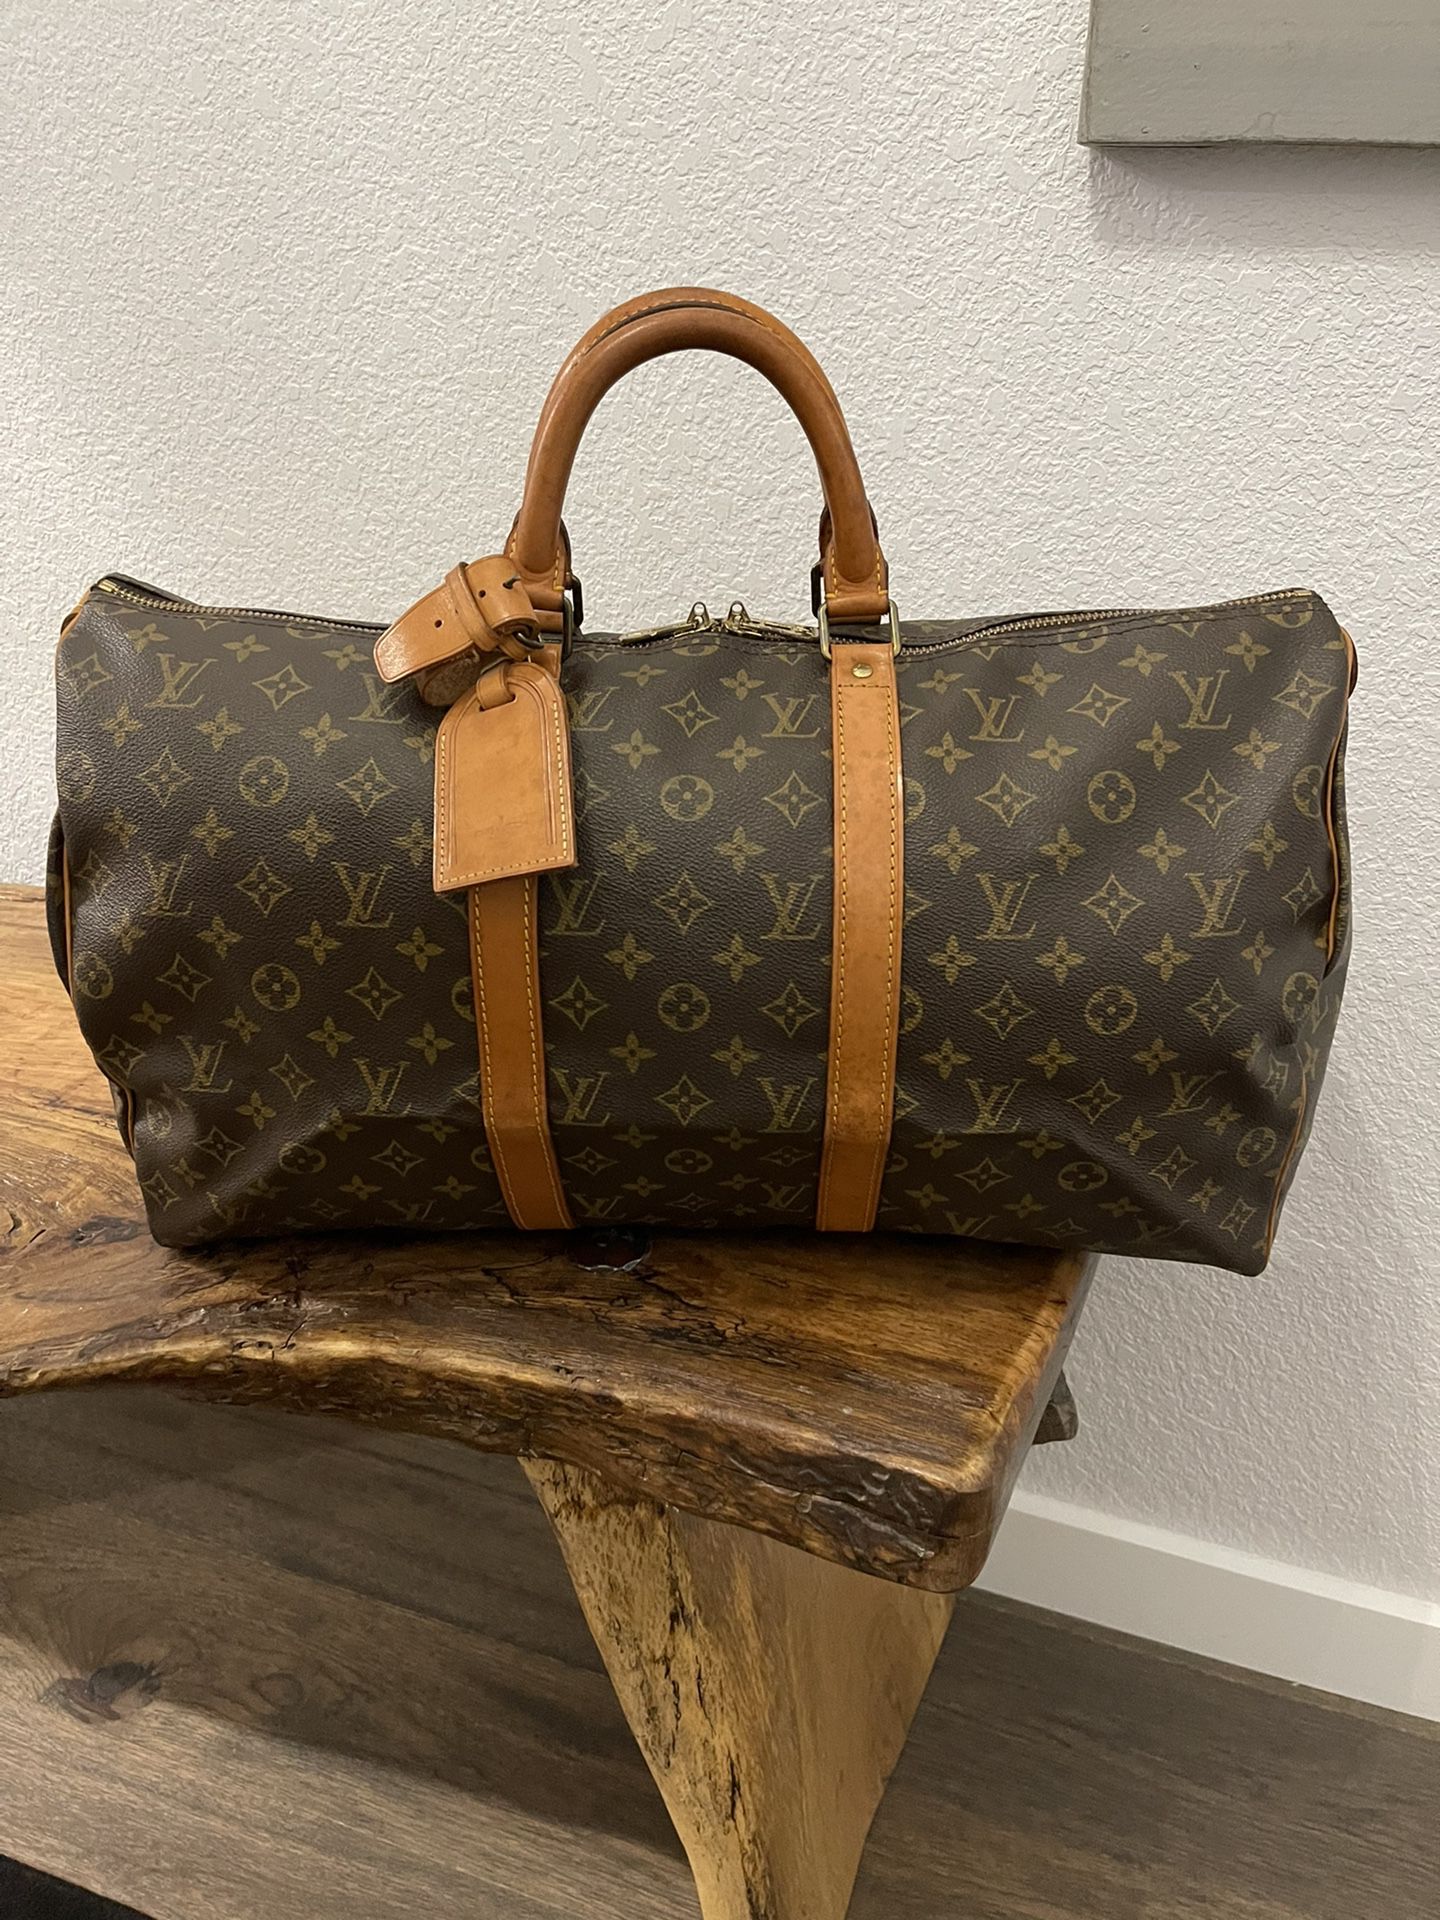 Authentic LOUIS VUITTON KEEPALL 50 TRAVEL BAG